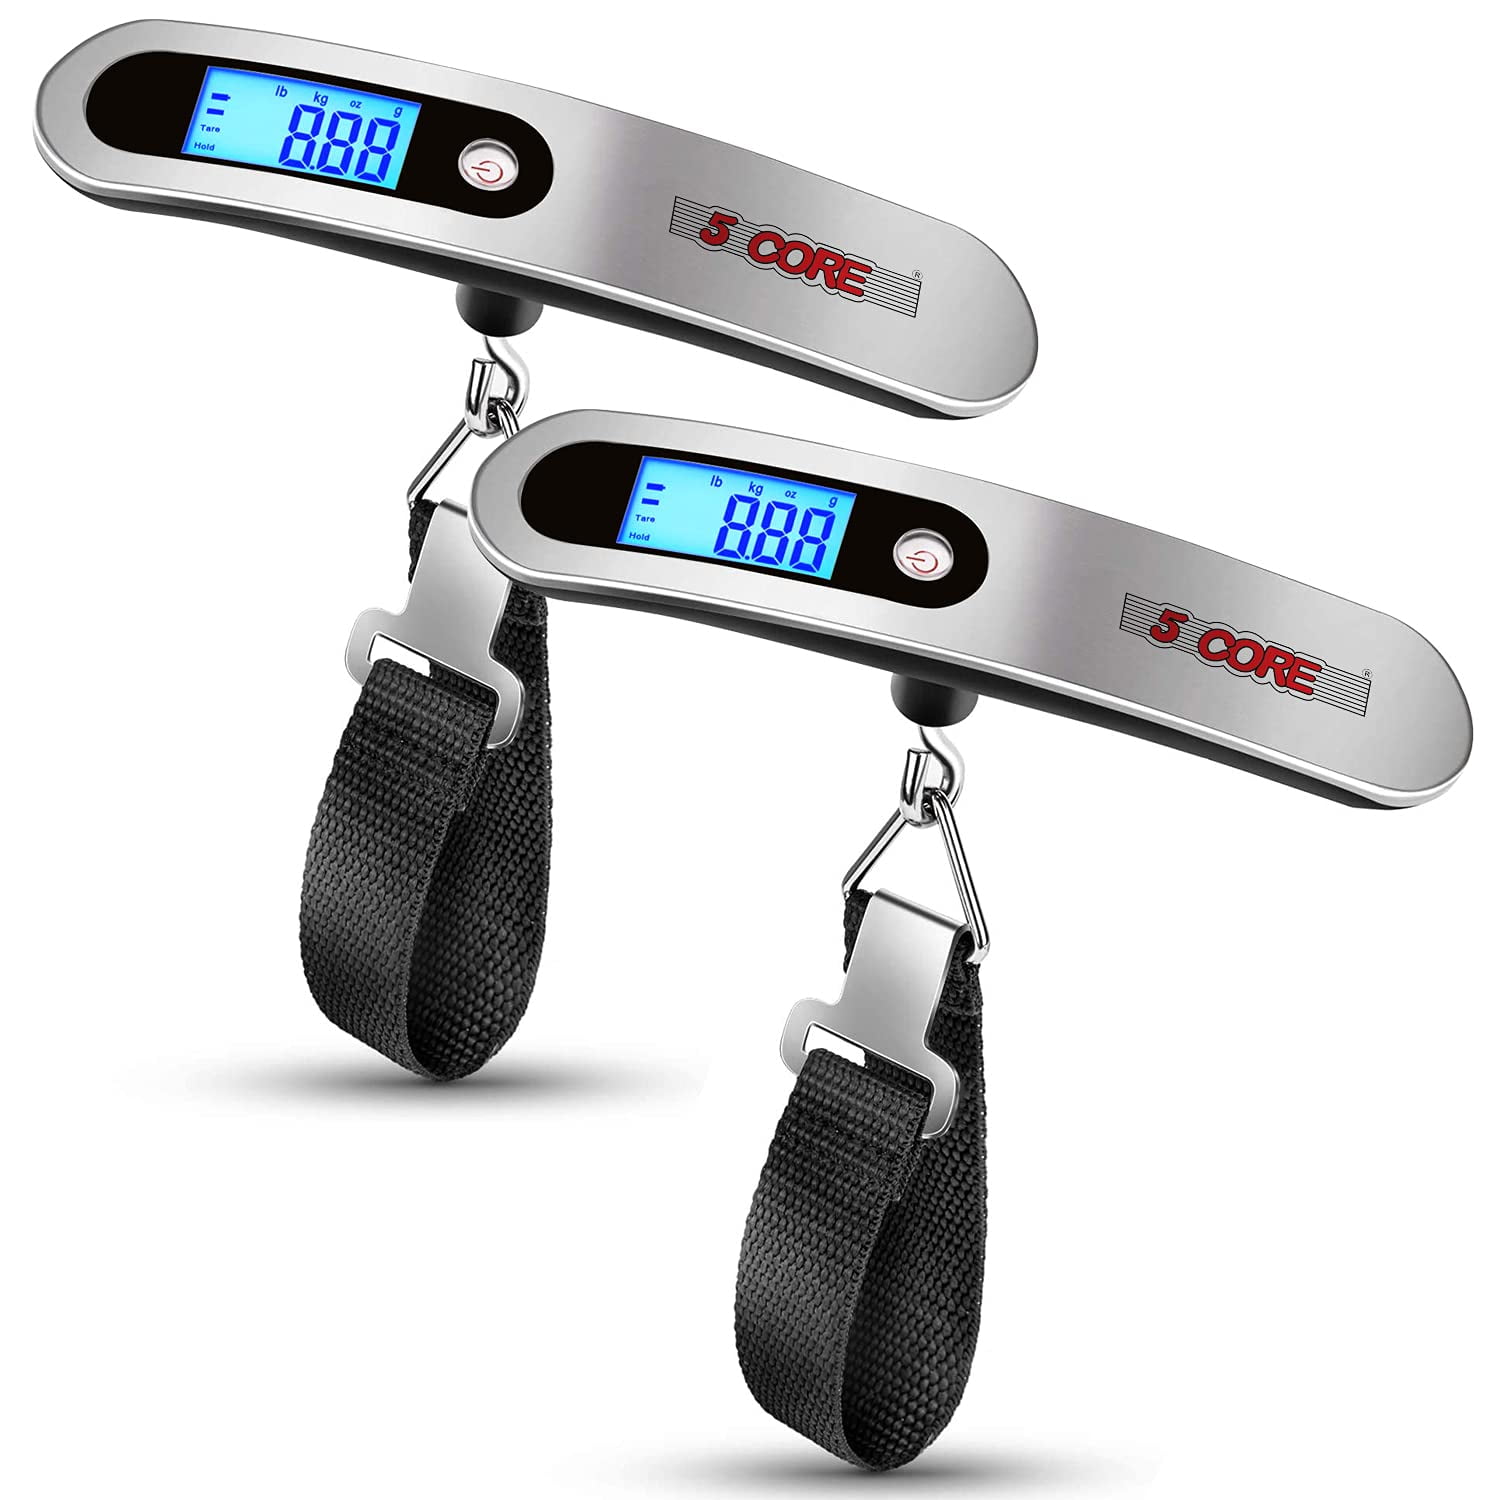 Luggage Scale Handheld Portable Electronic Digital Hanging Bag Weight Scales  Travel 110 LBS 50 KG 5 Core LSS-005Ratings ✔️ Best Deal (2 Pieces) 